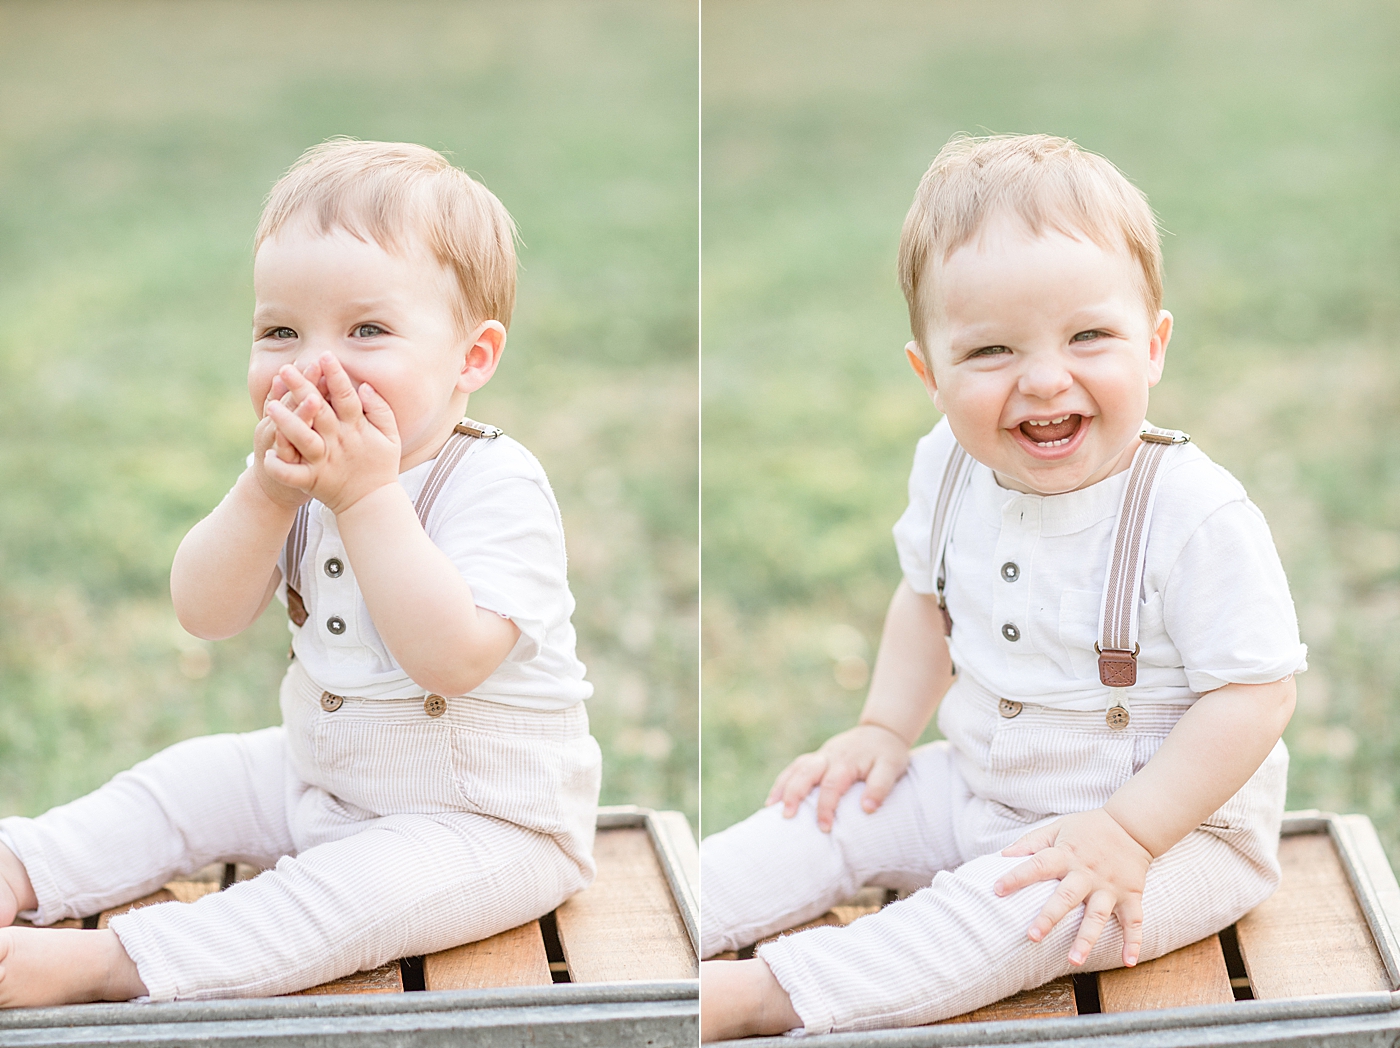 One year old sitting on wood create for first birthday photoshoot Brittany Elise Photography.